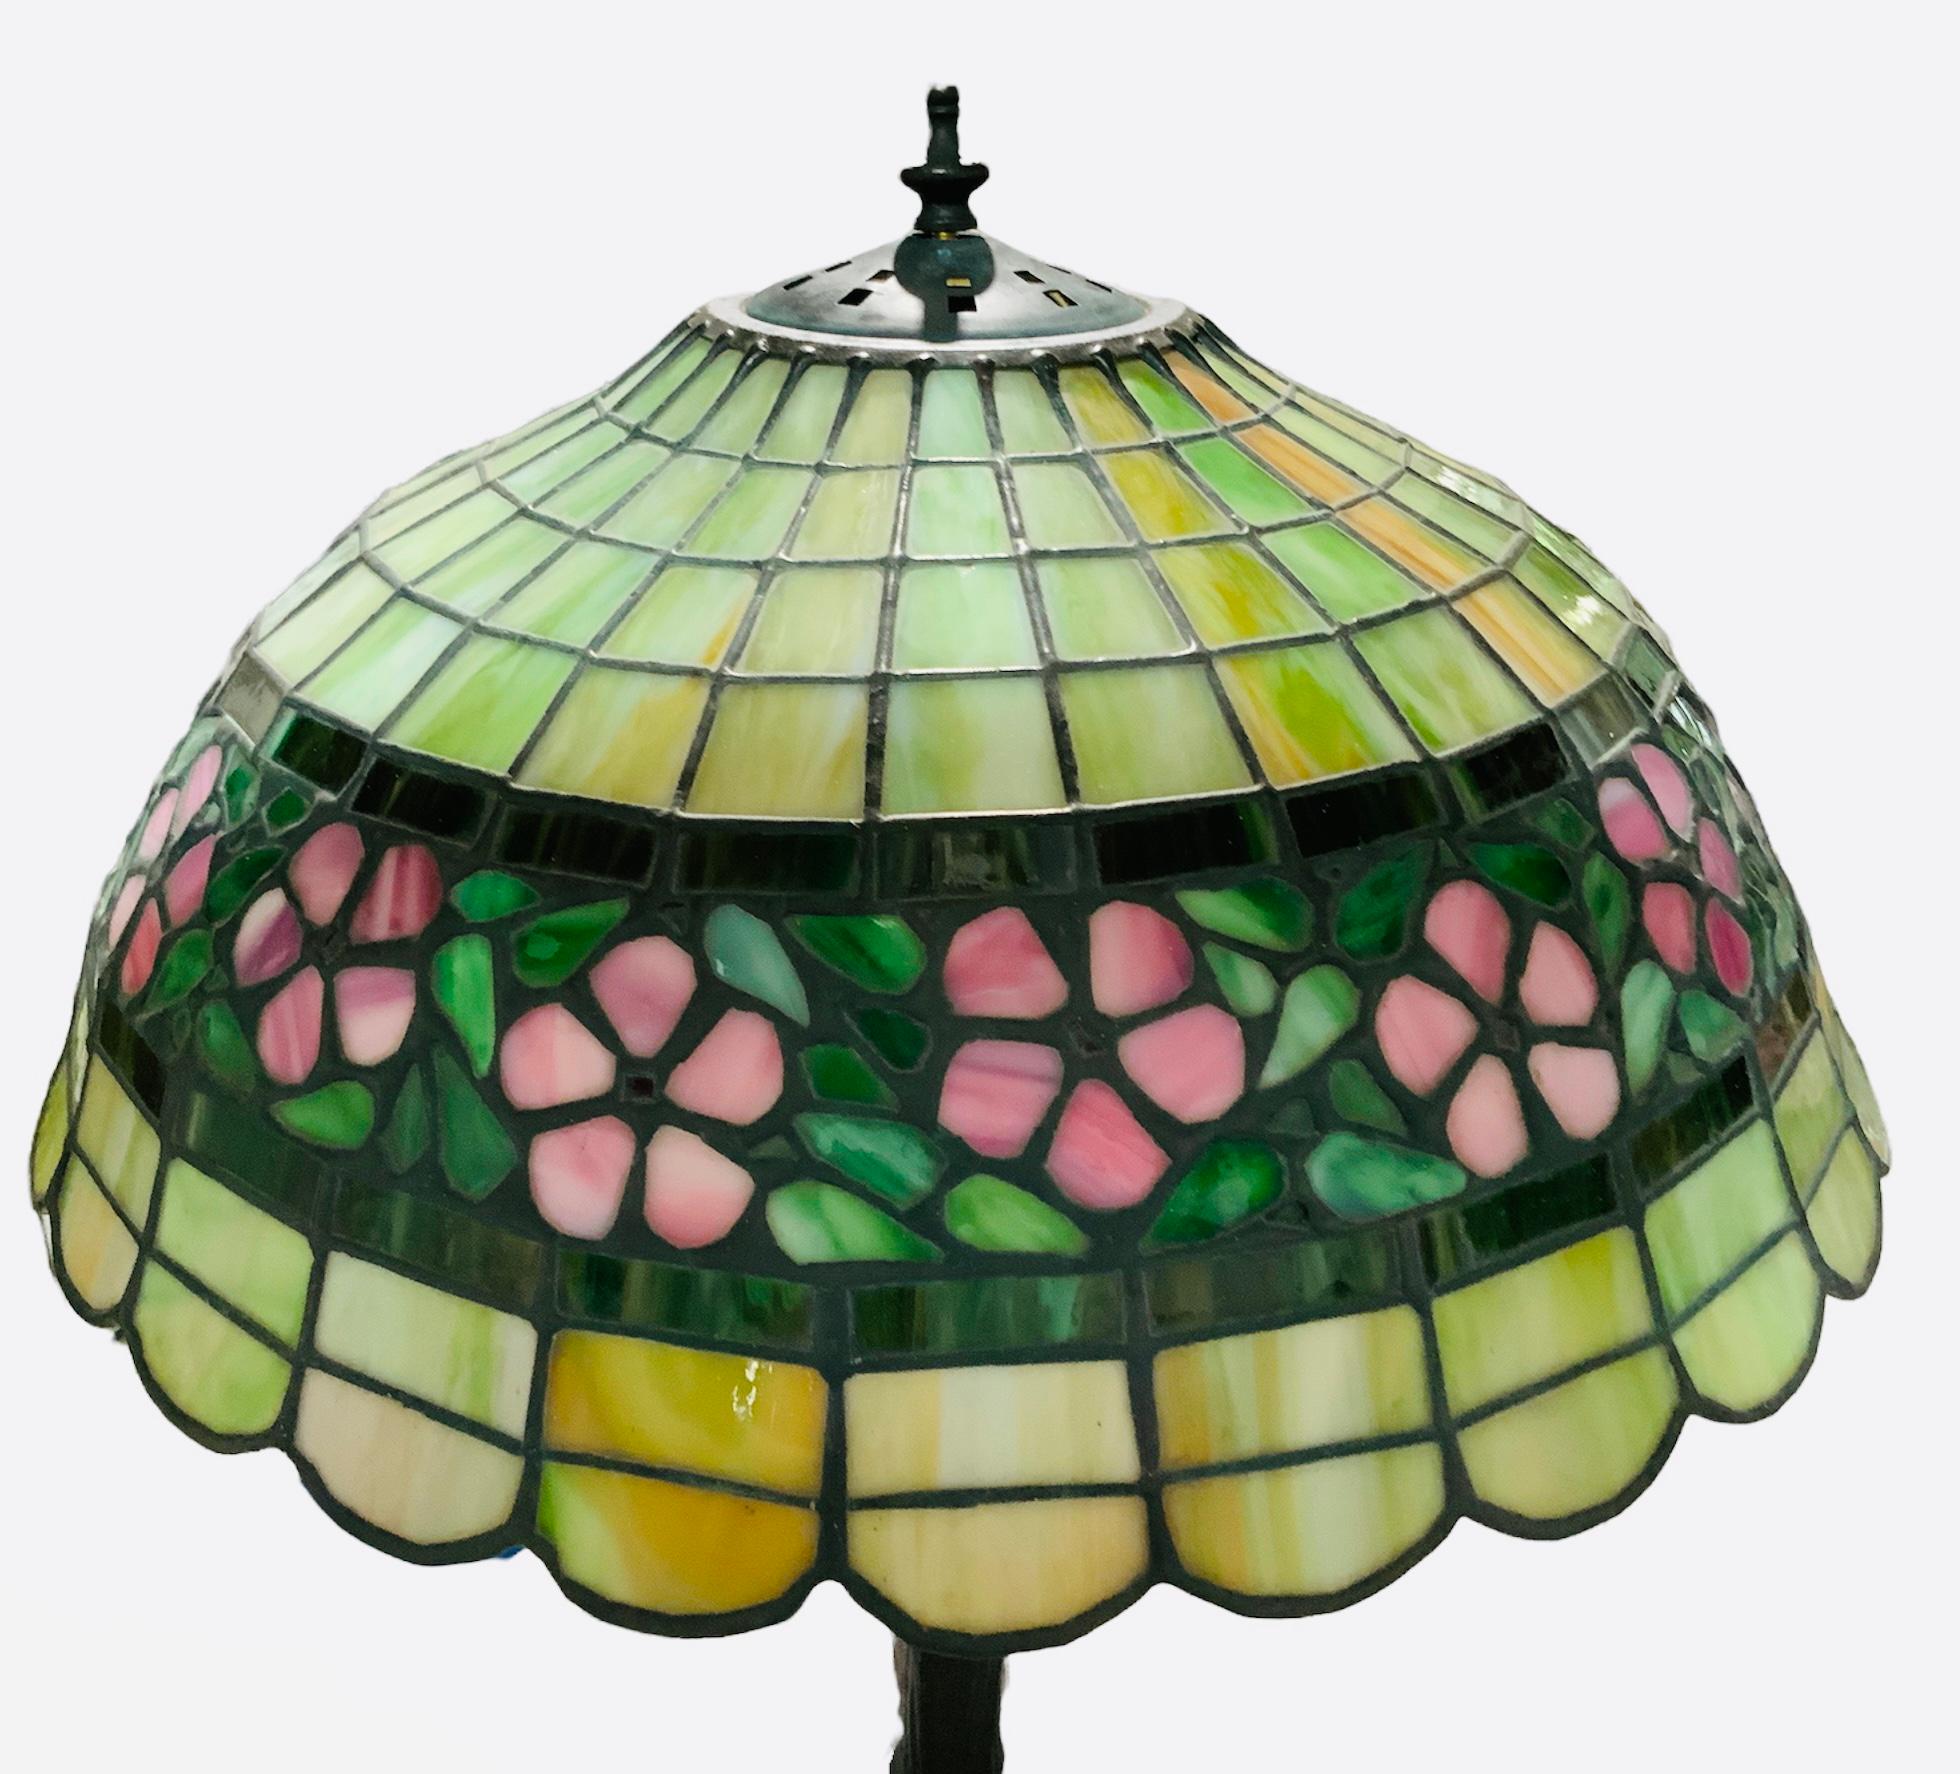 This is a heavy Tiffany & Co. Style table lamp. Its shade is shaped as an umbrella with scalloped border. Its stained glass depict different shades of green, yellow, white and pink. These different shapes of geometric glass cuts are joined by a